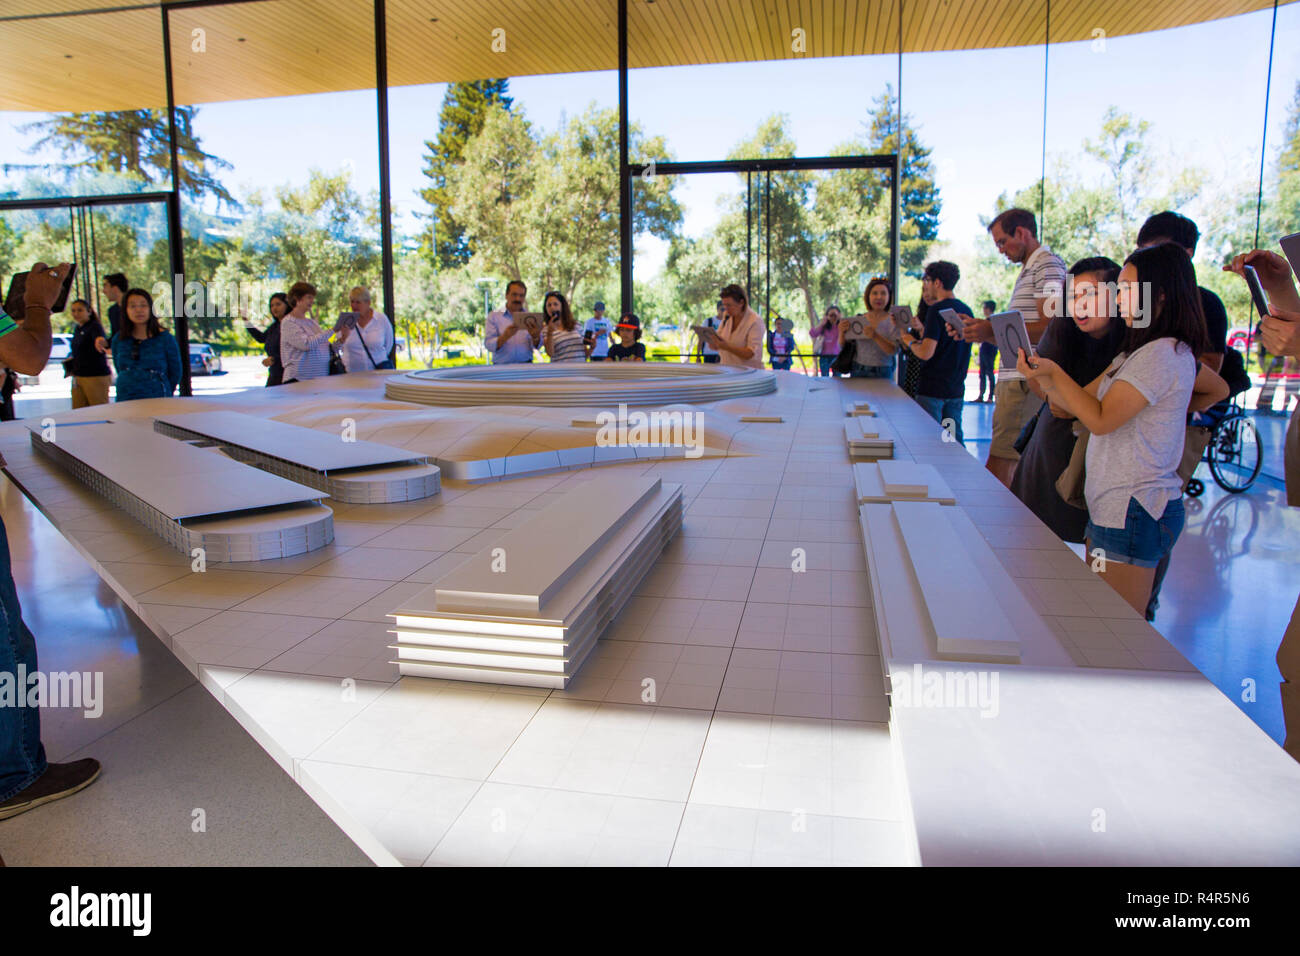 Apple Visitor Center, 1 Apple Park Way, San Jose, California, United States (USA) - August 5, 2018: Guest customers are interested of Apple products a Stock Photo